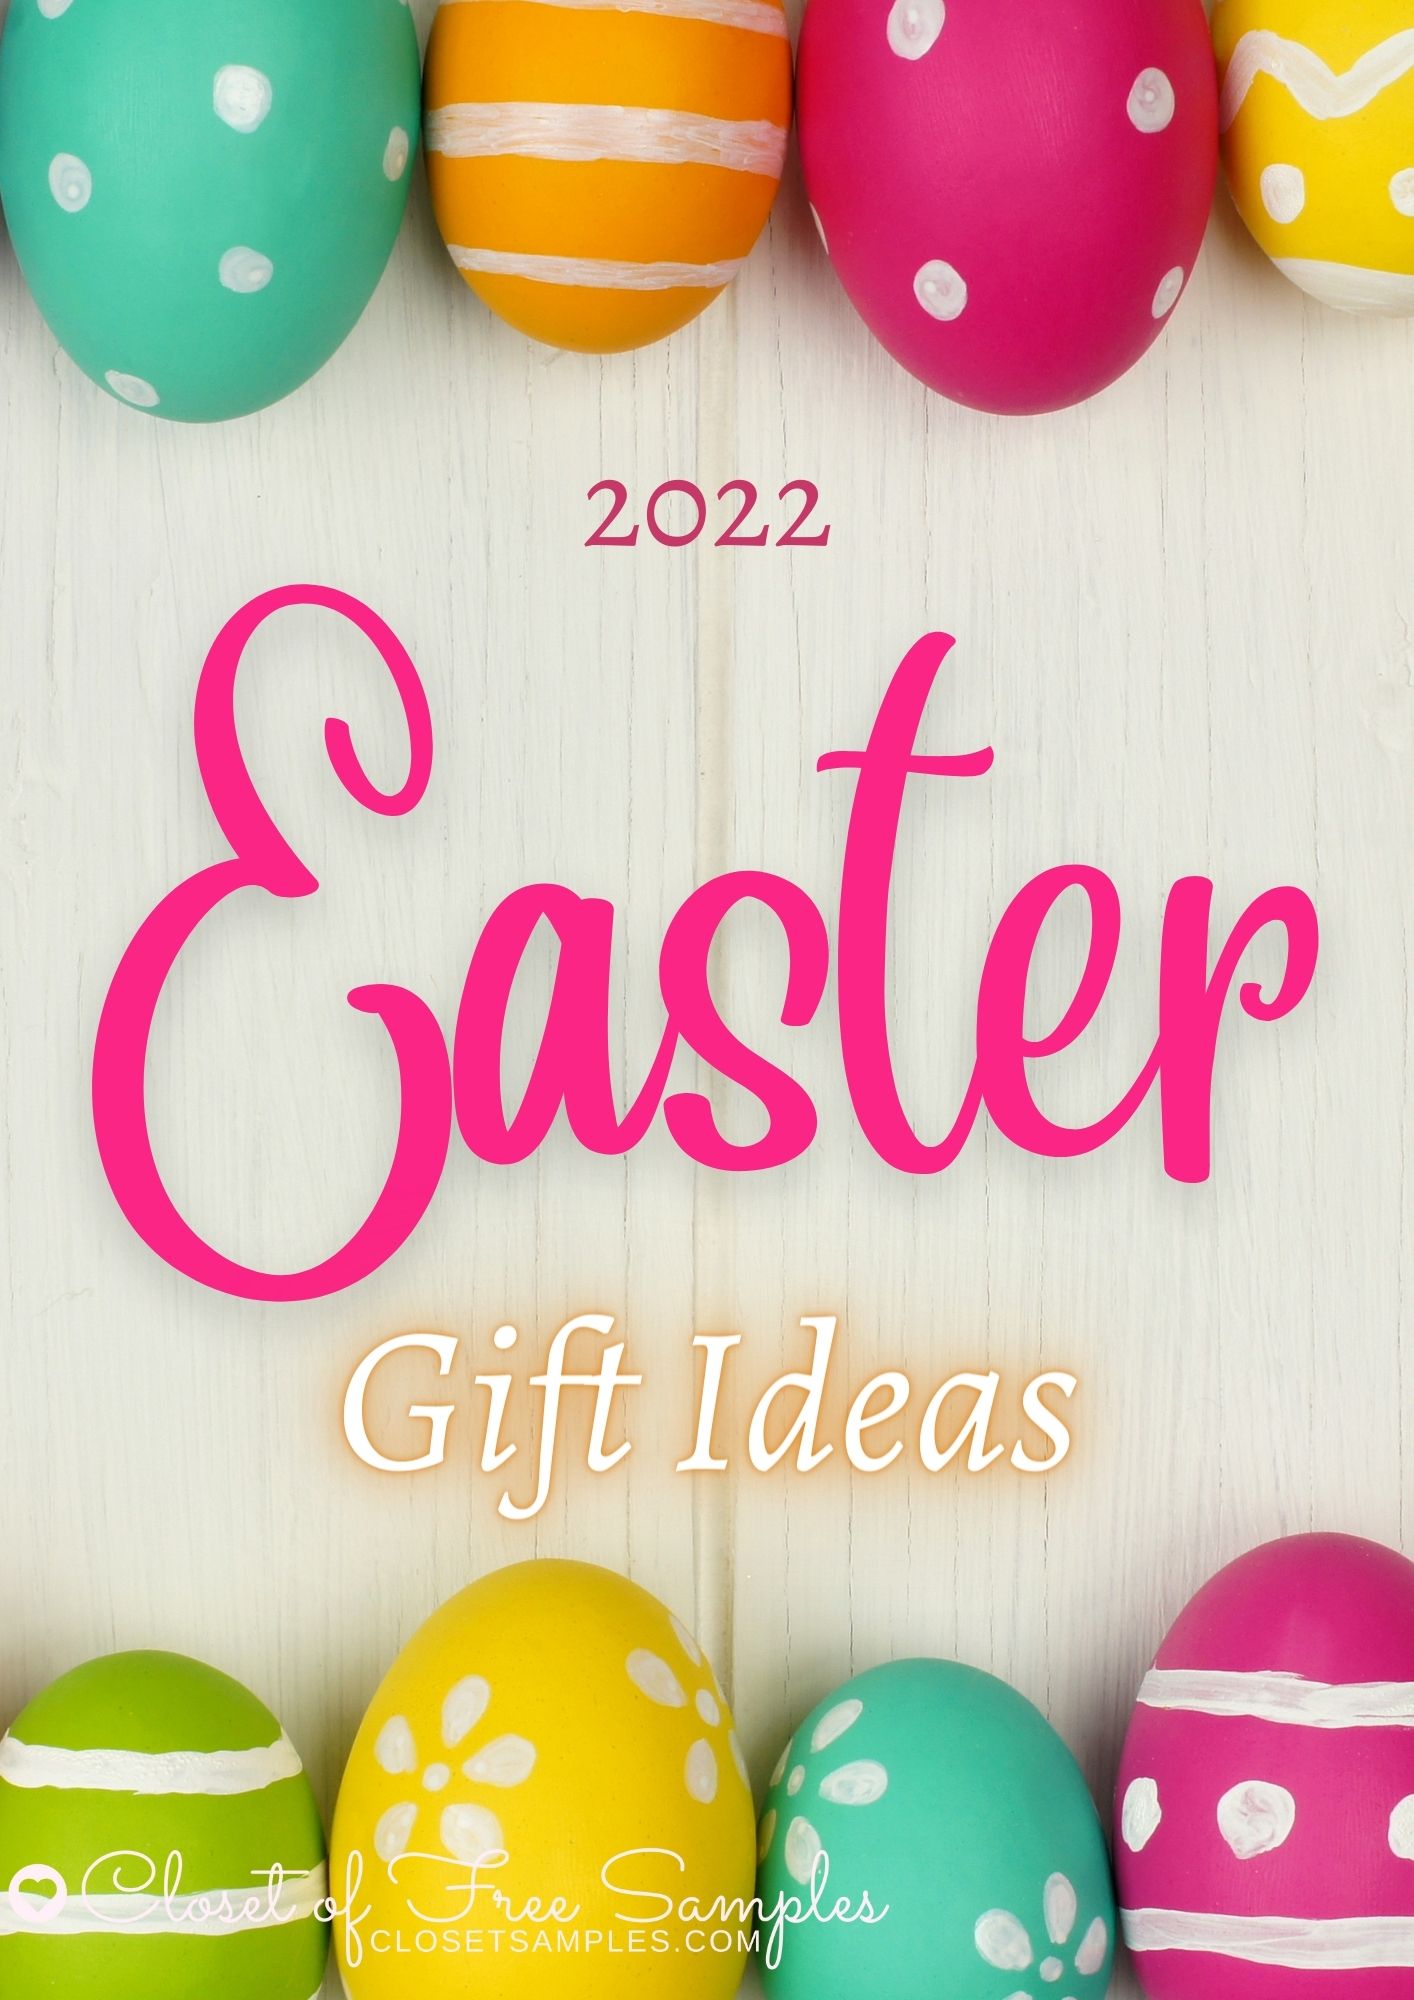 Fun Easter Finds for 2022 A Gift Guide Closetsamples Pinterest